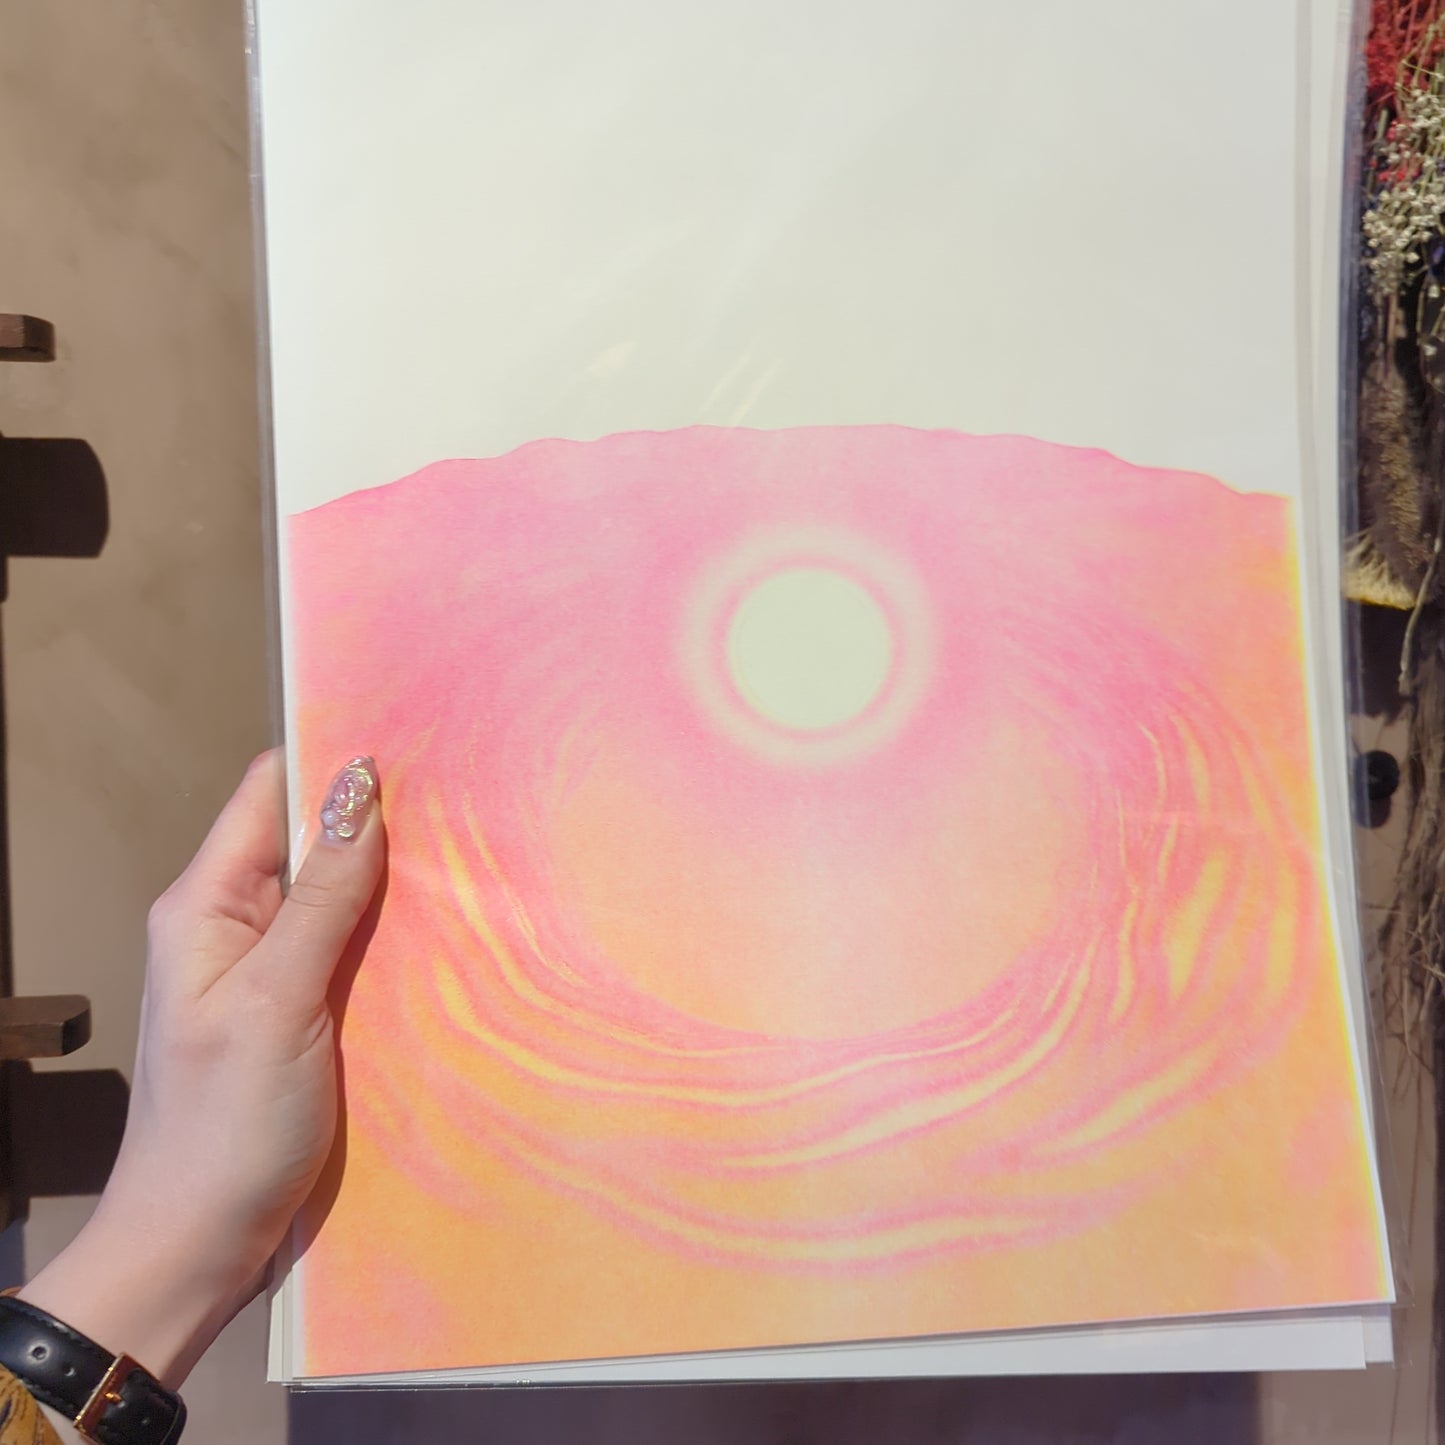 "Black Hole" Print by Abstract Art Student